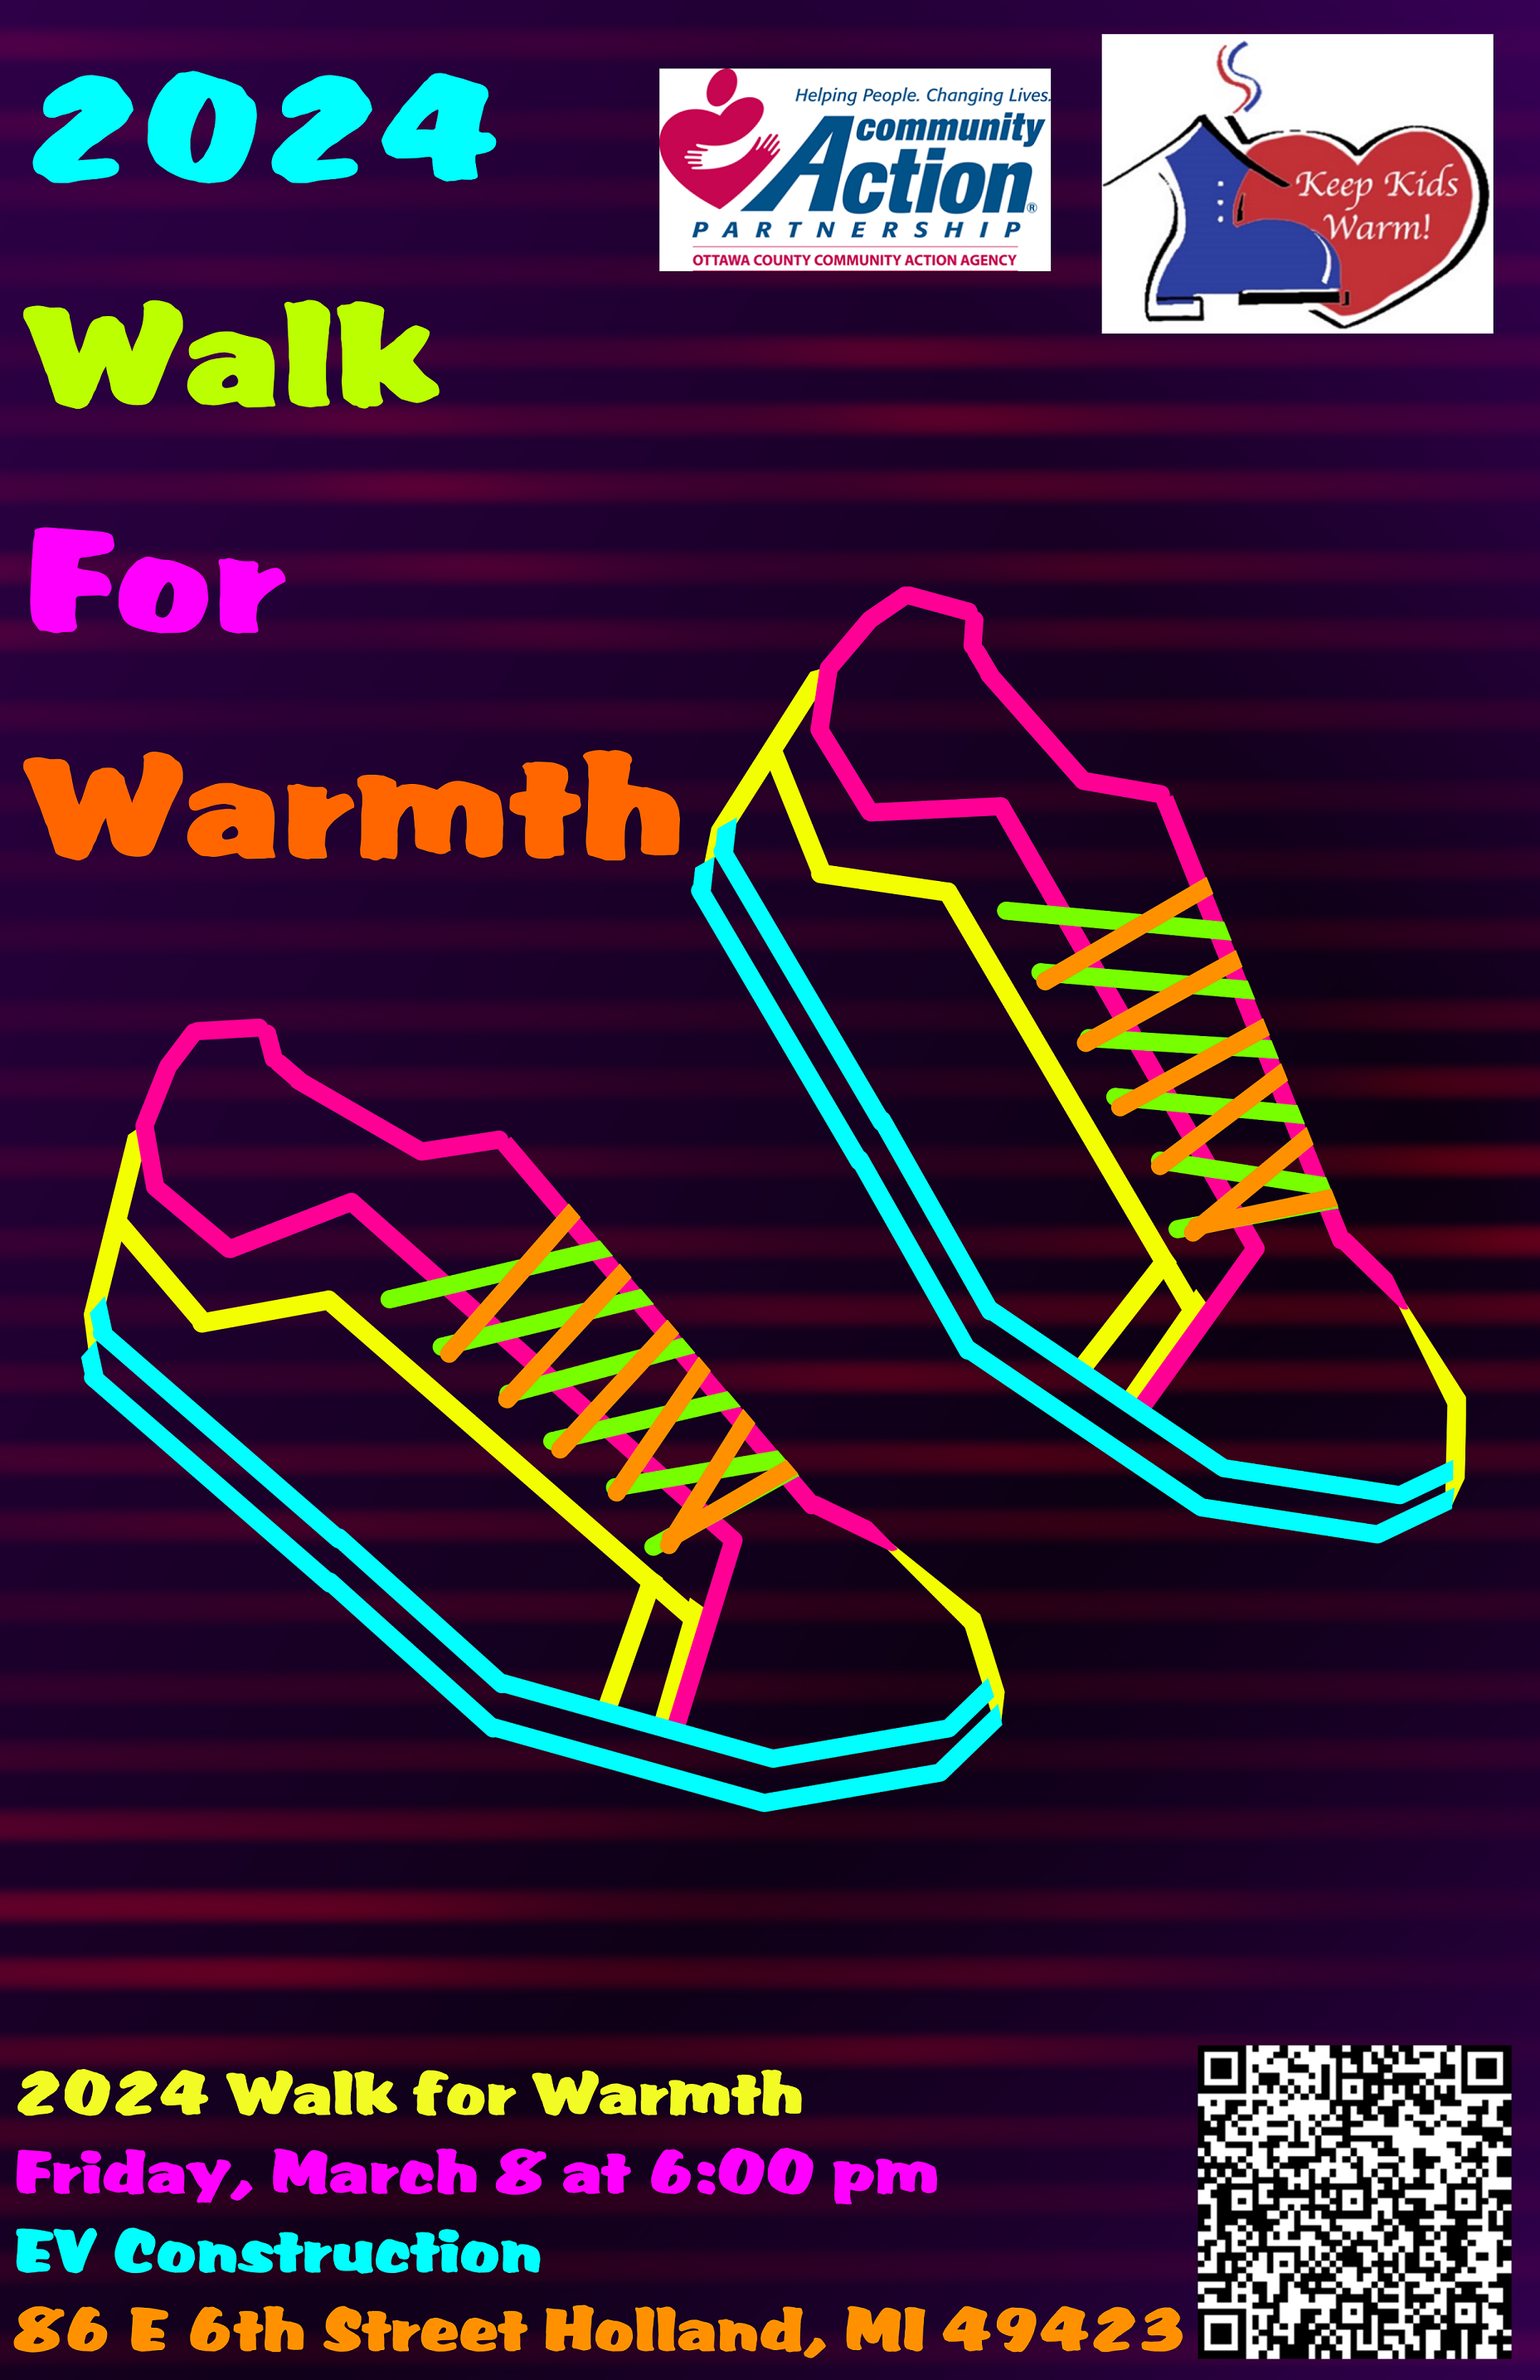 Walk for Warmth poster designed by Isaac Groth